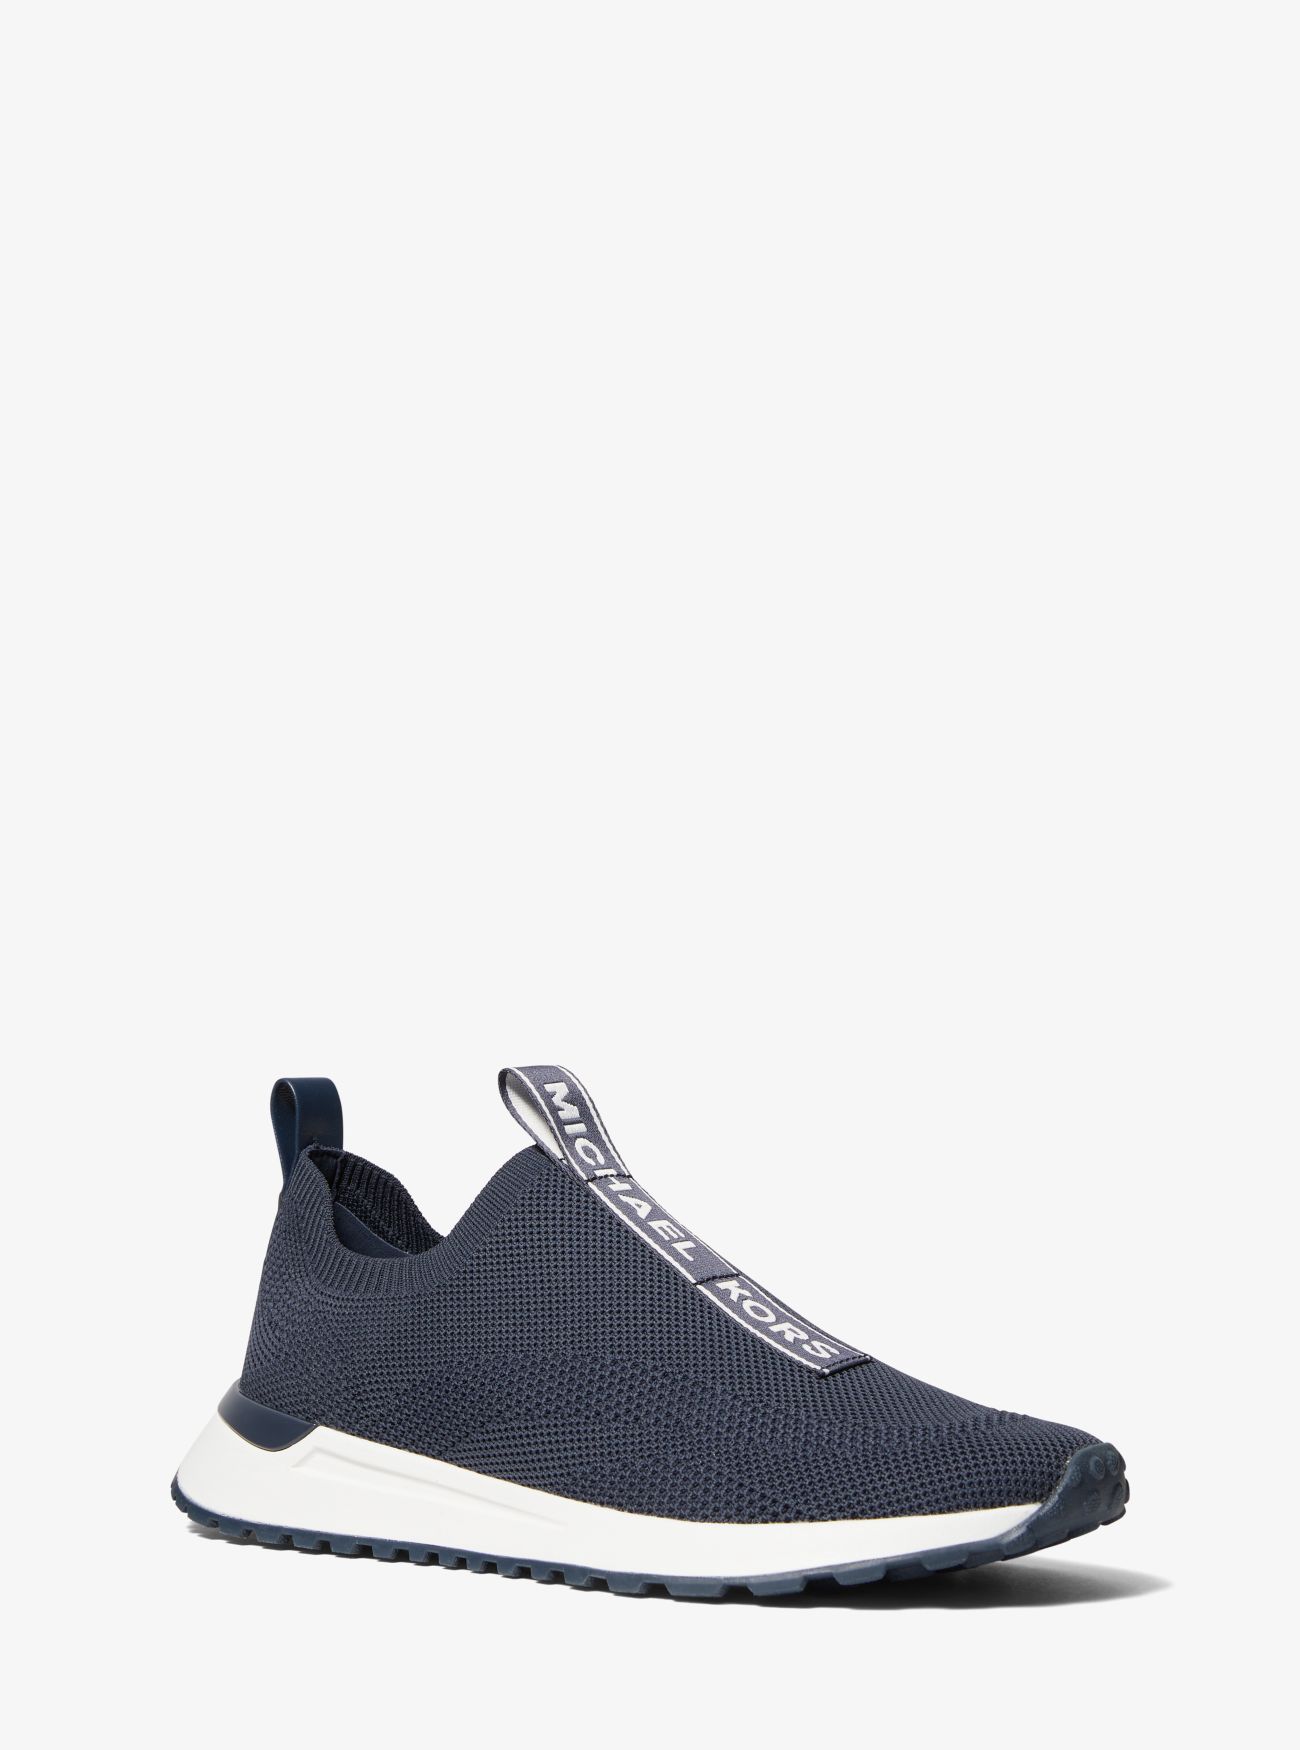 MK Miles Stretch Knit Slip-on Trainers - Navy - Michael Kors